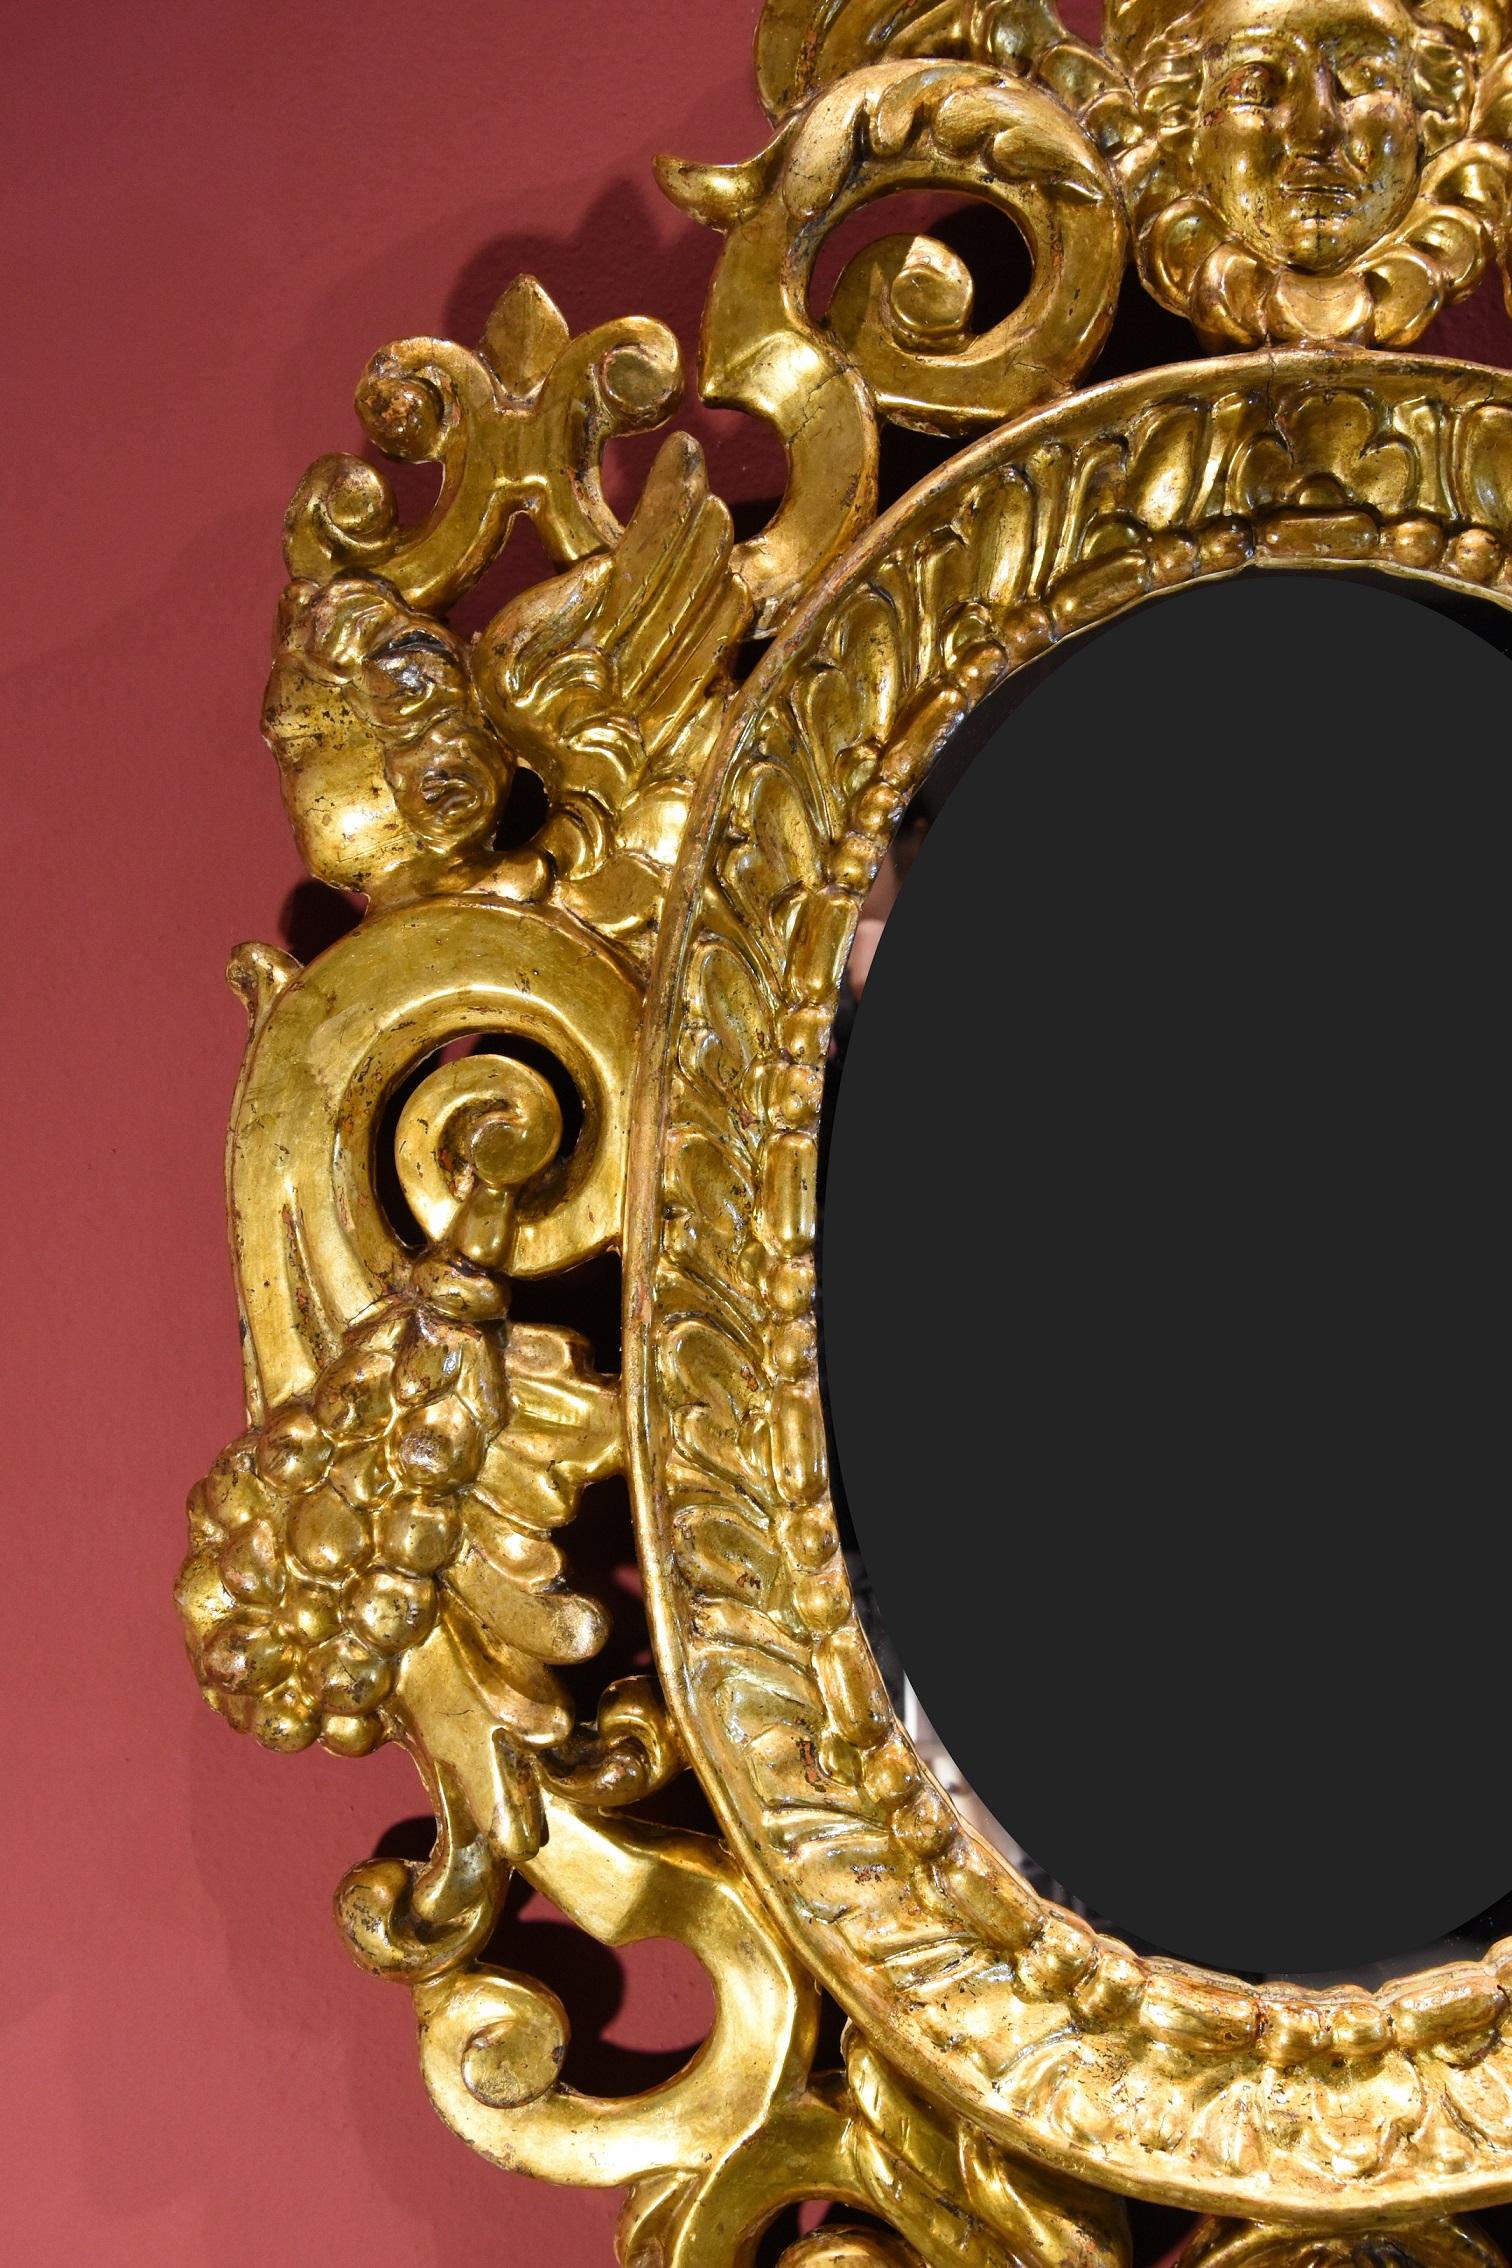 Pair Carved Gilded Mirrors Gold Wood Venice 18th Century Italy Quality Baroque For Sale 5